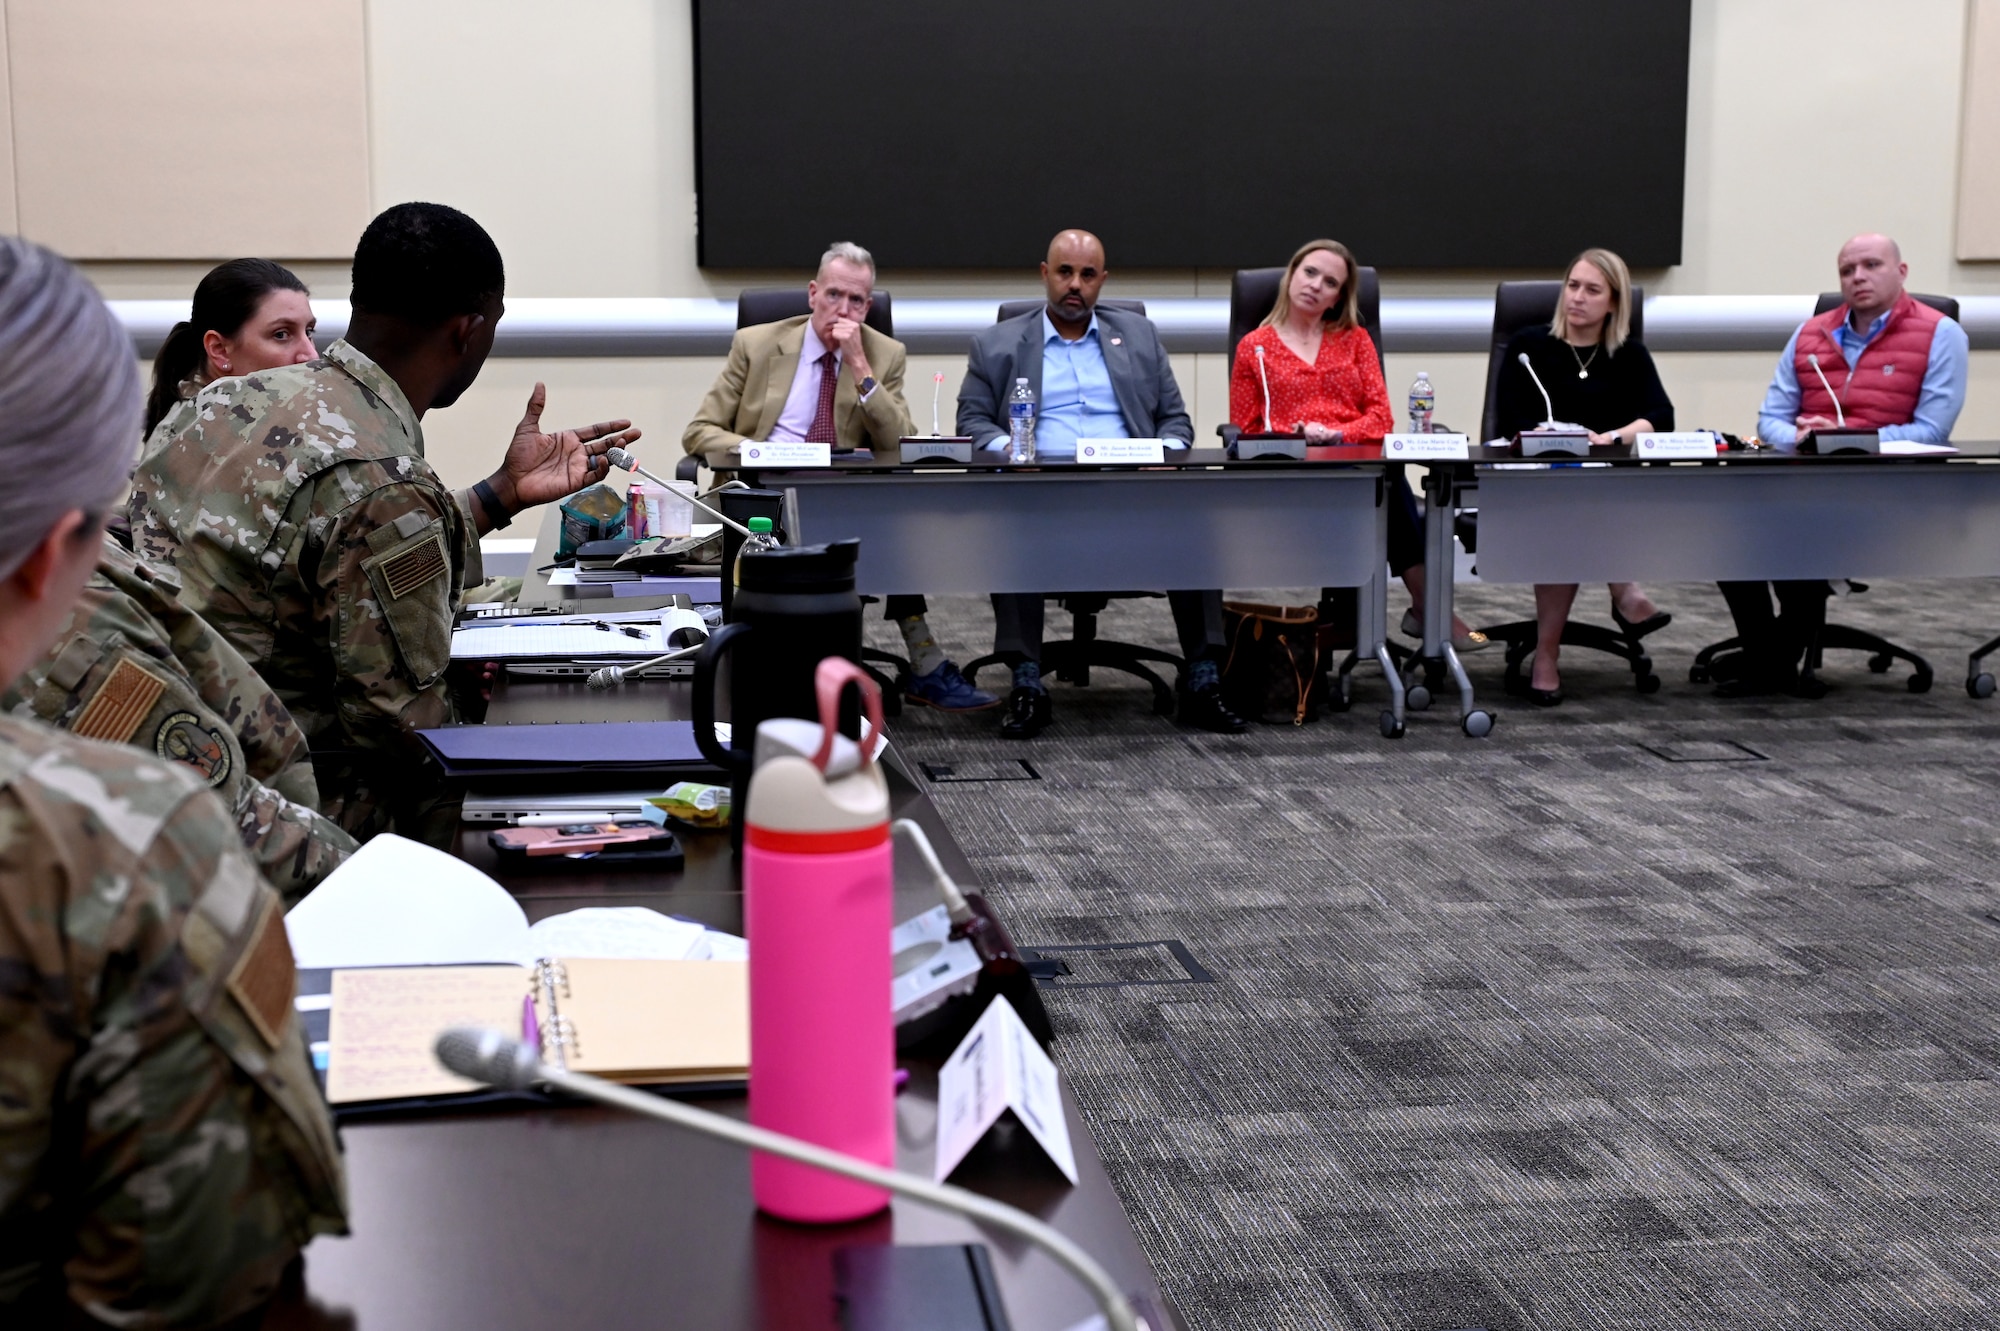 Lt. Col. James Nicholson asks the Washington Nationals executive team a question during a panel, April 17, 2024, at the Jacob Smart Conference Center on Joint Base Andrews, Maryland.